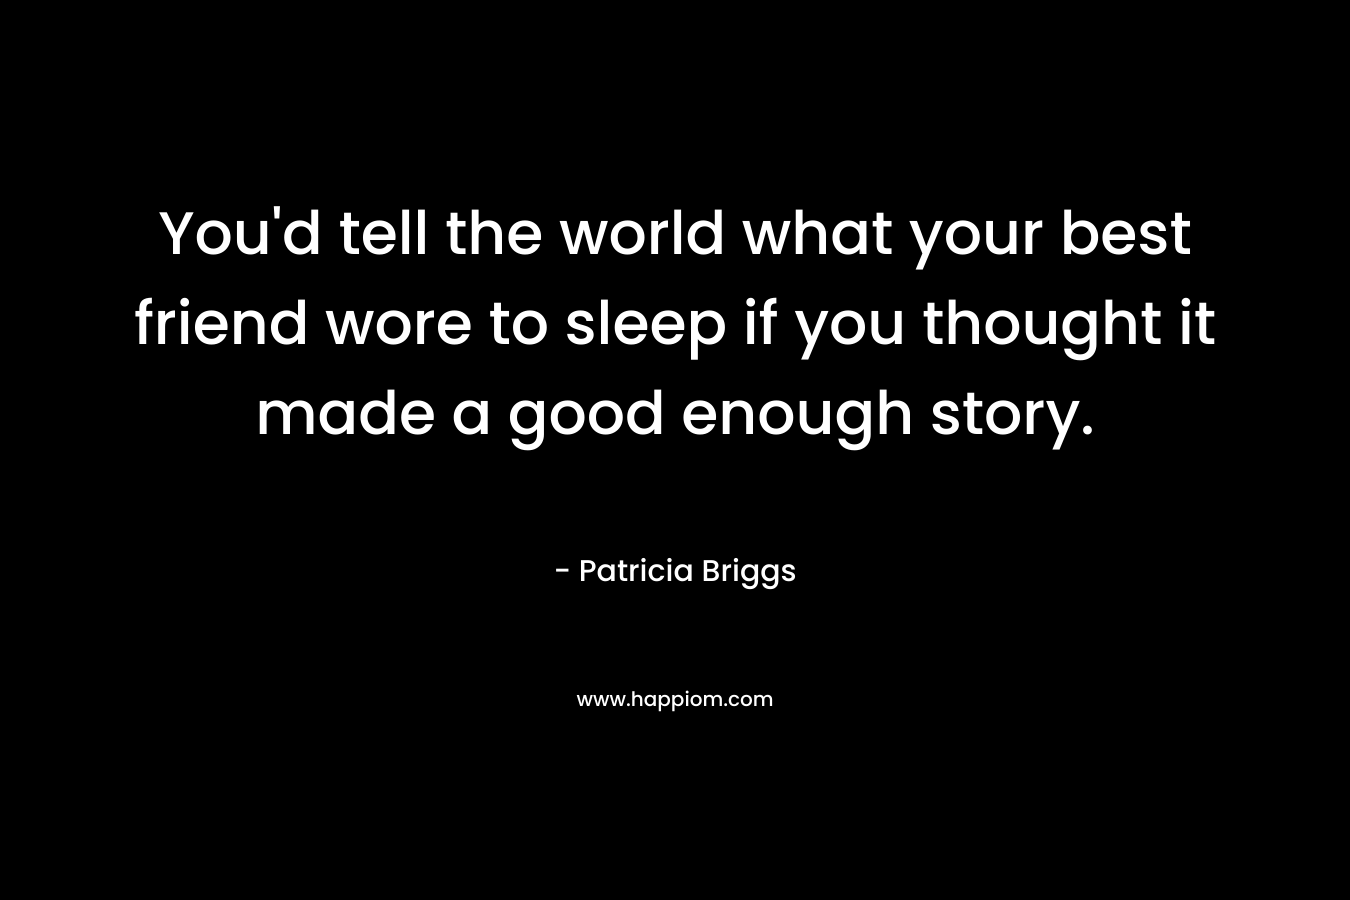 You’d tell the world what your best friend wore to sleep if you thought it made a good enough story. – Patricia Briggs